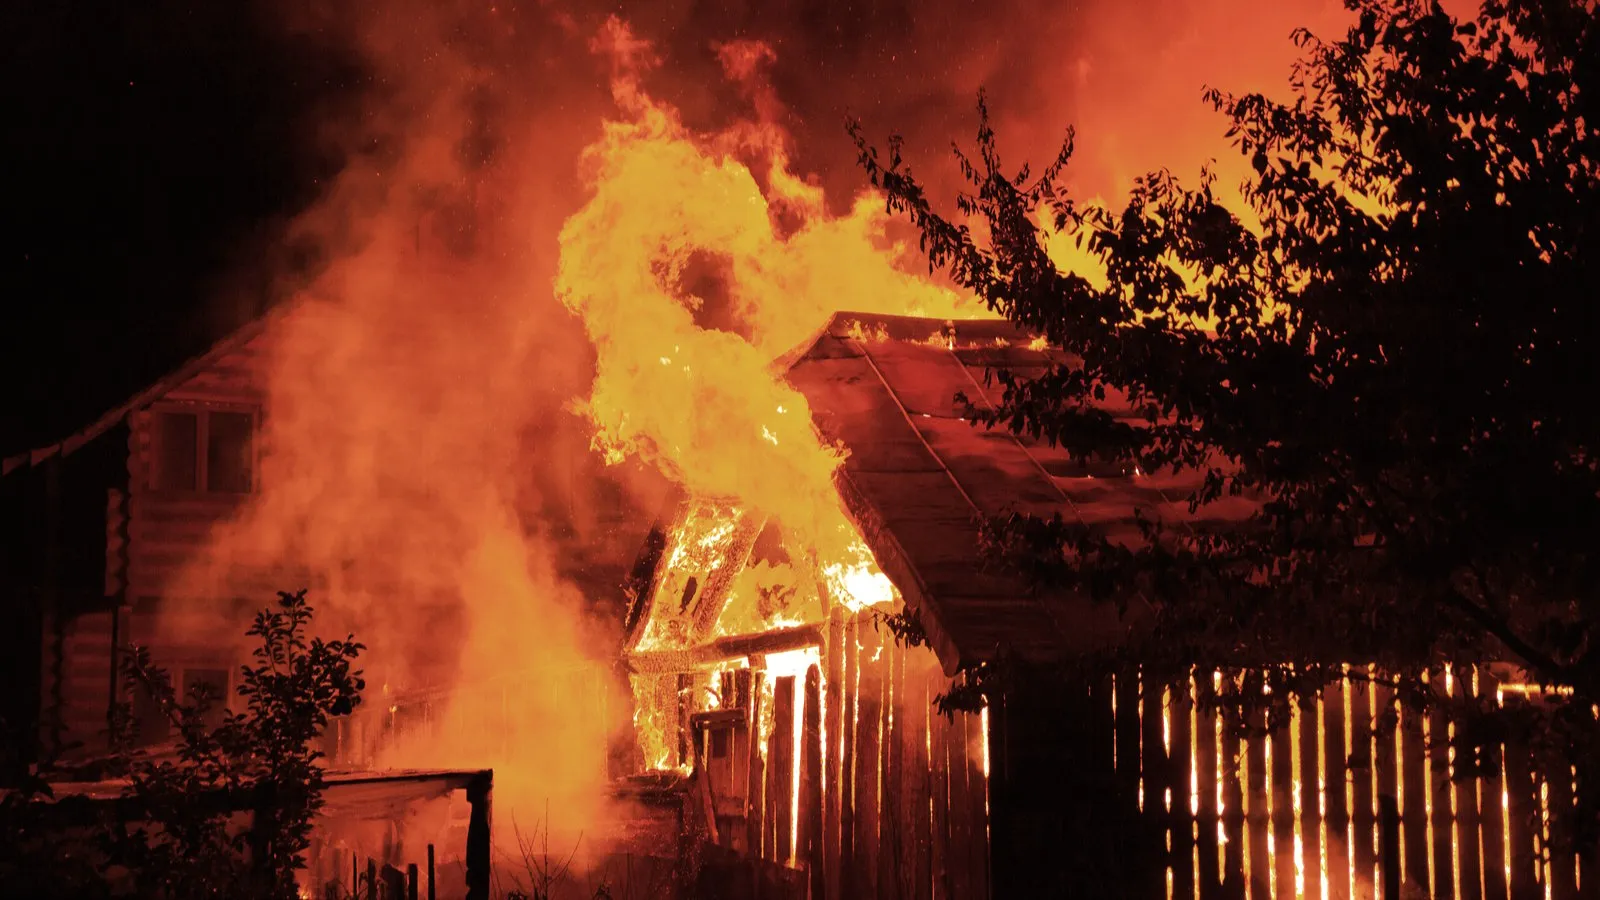 Wooden house or barn burning on fire at night. Image: Shutterstock